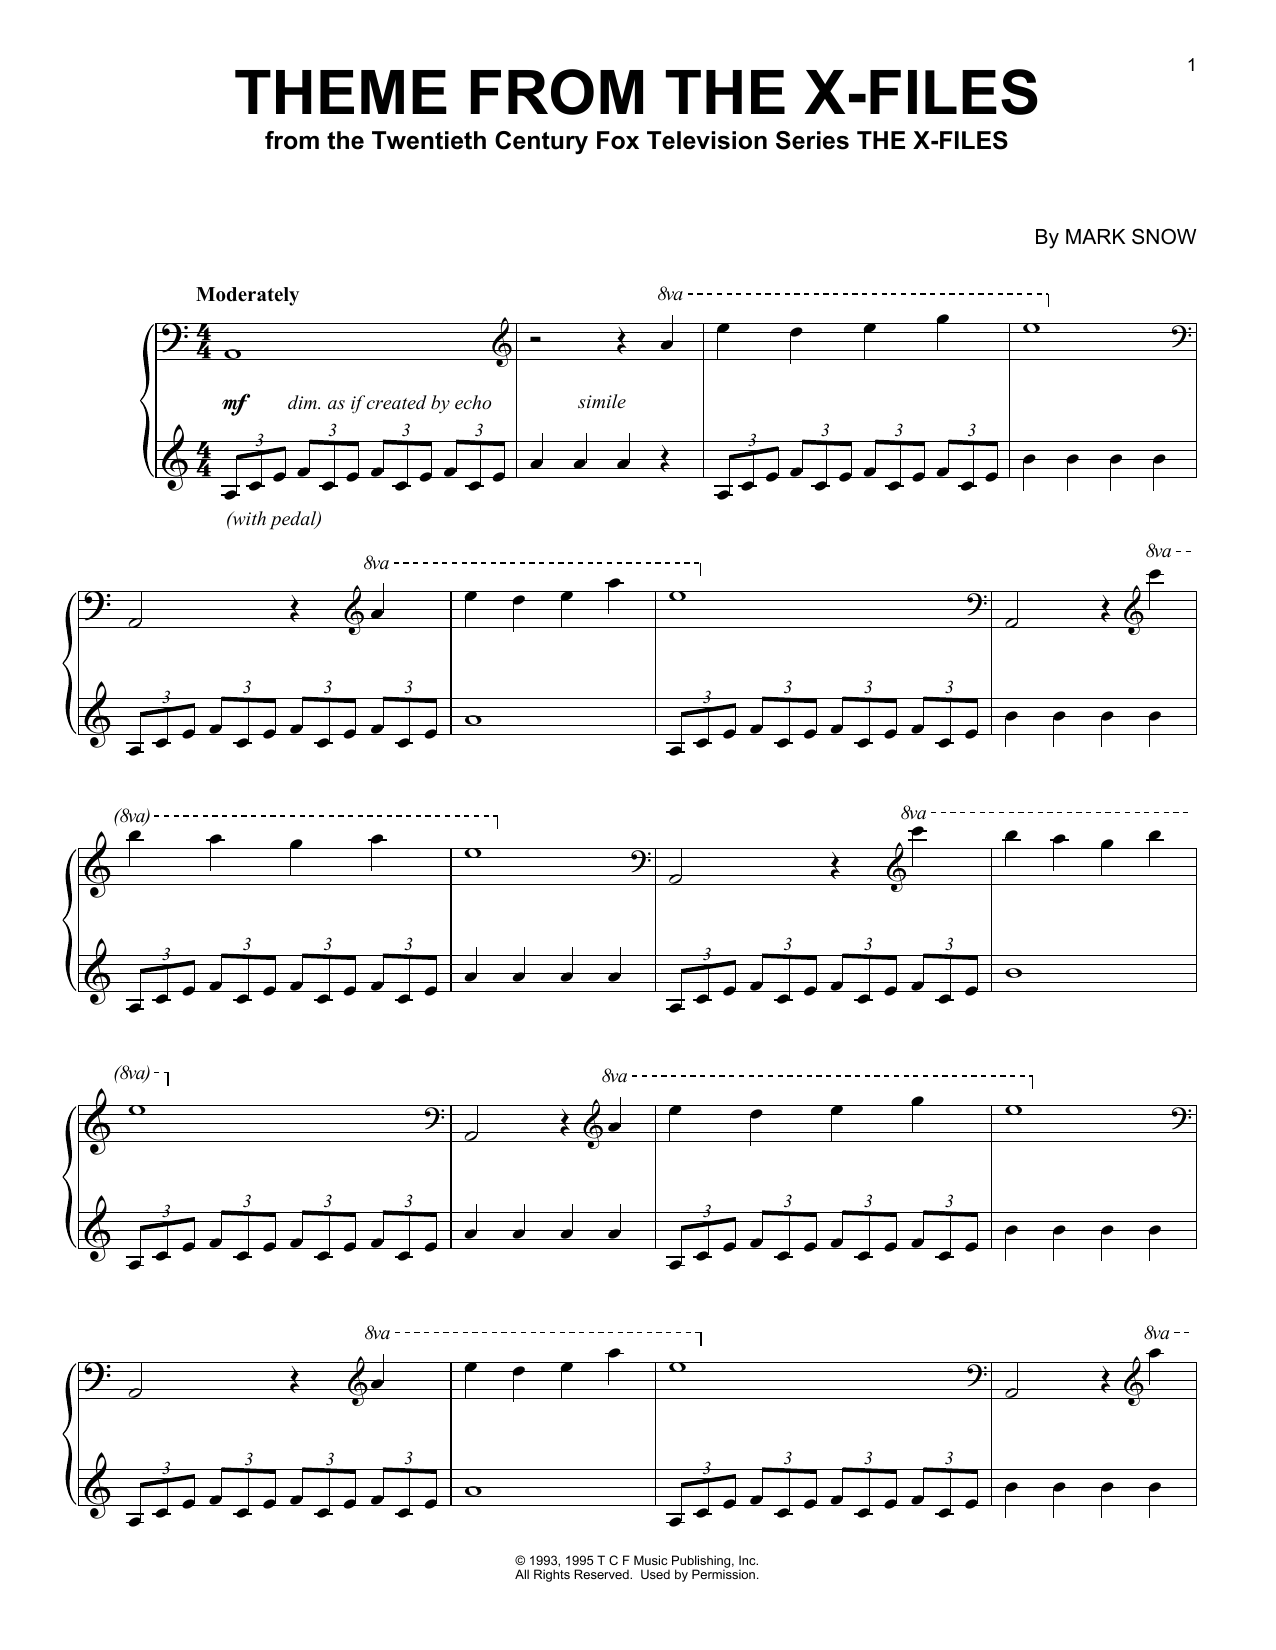 Download Mark Snow Theme From The X-Files Sheet Music